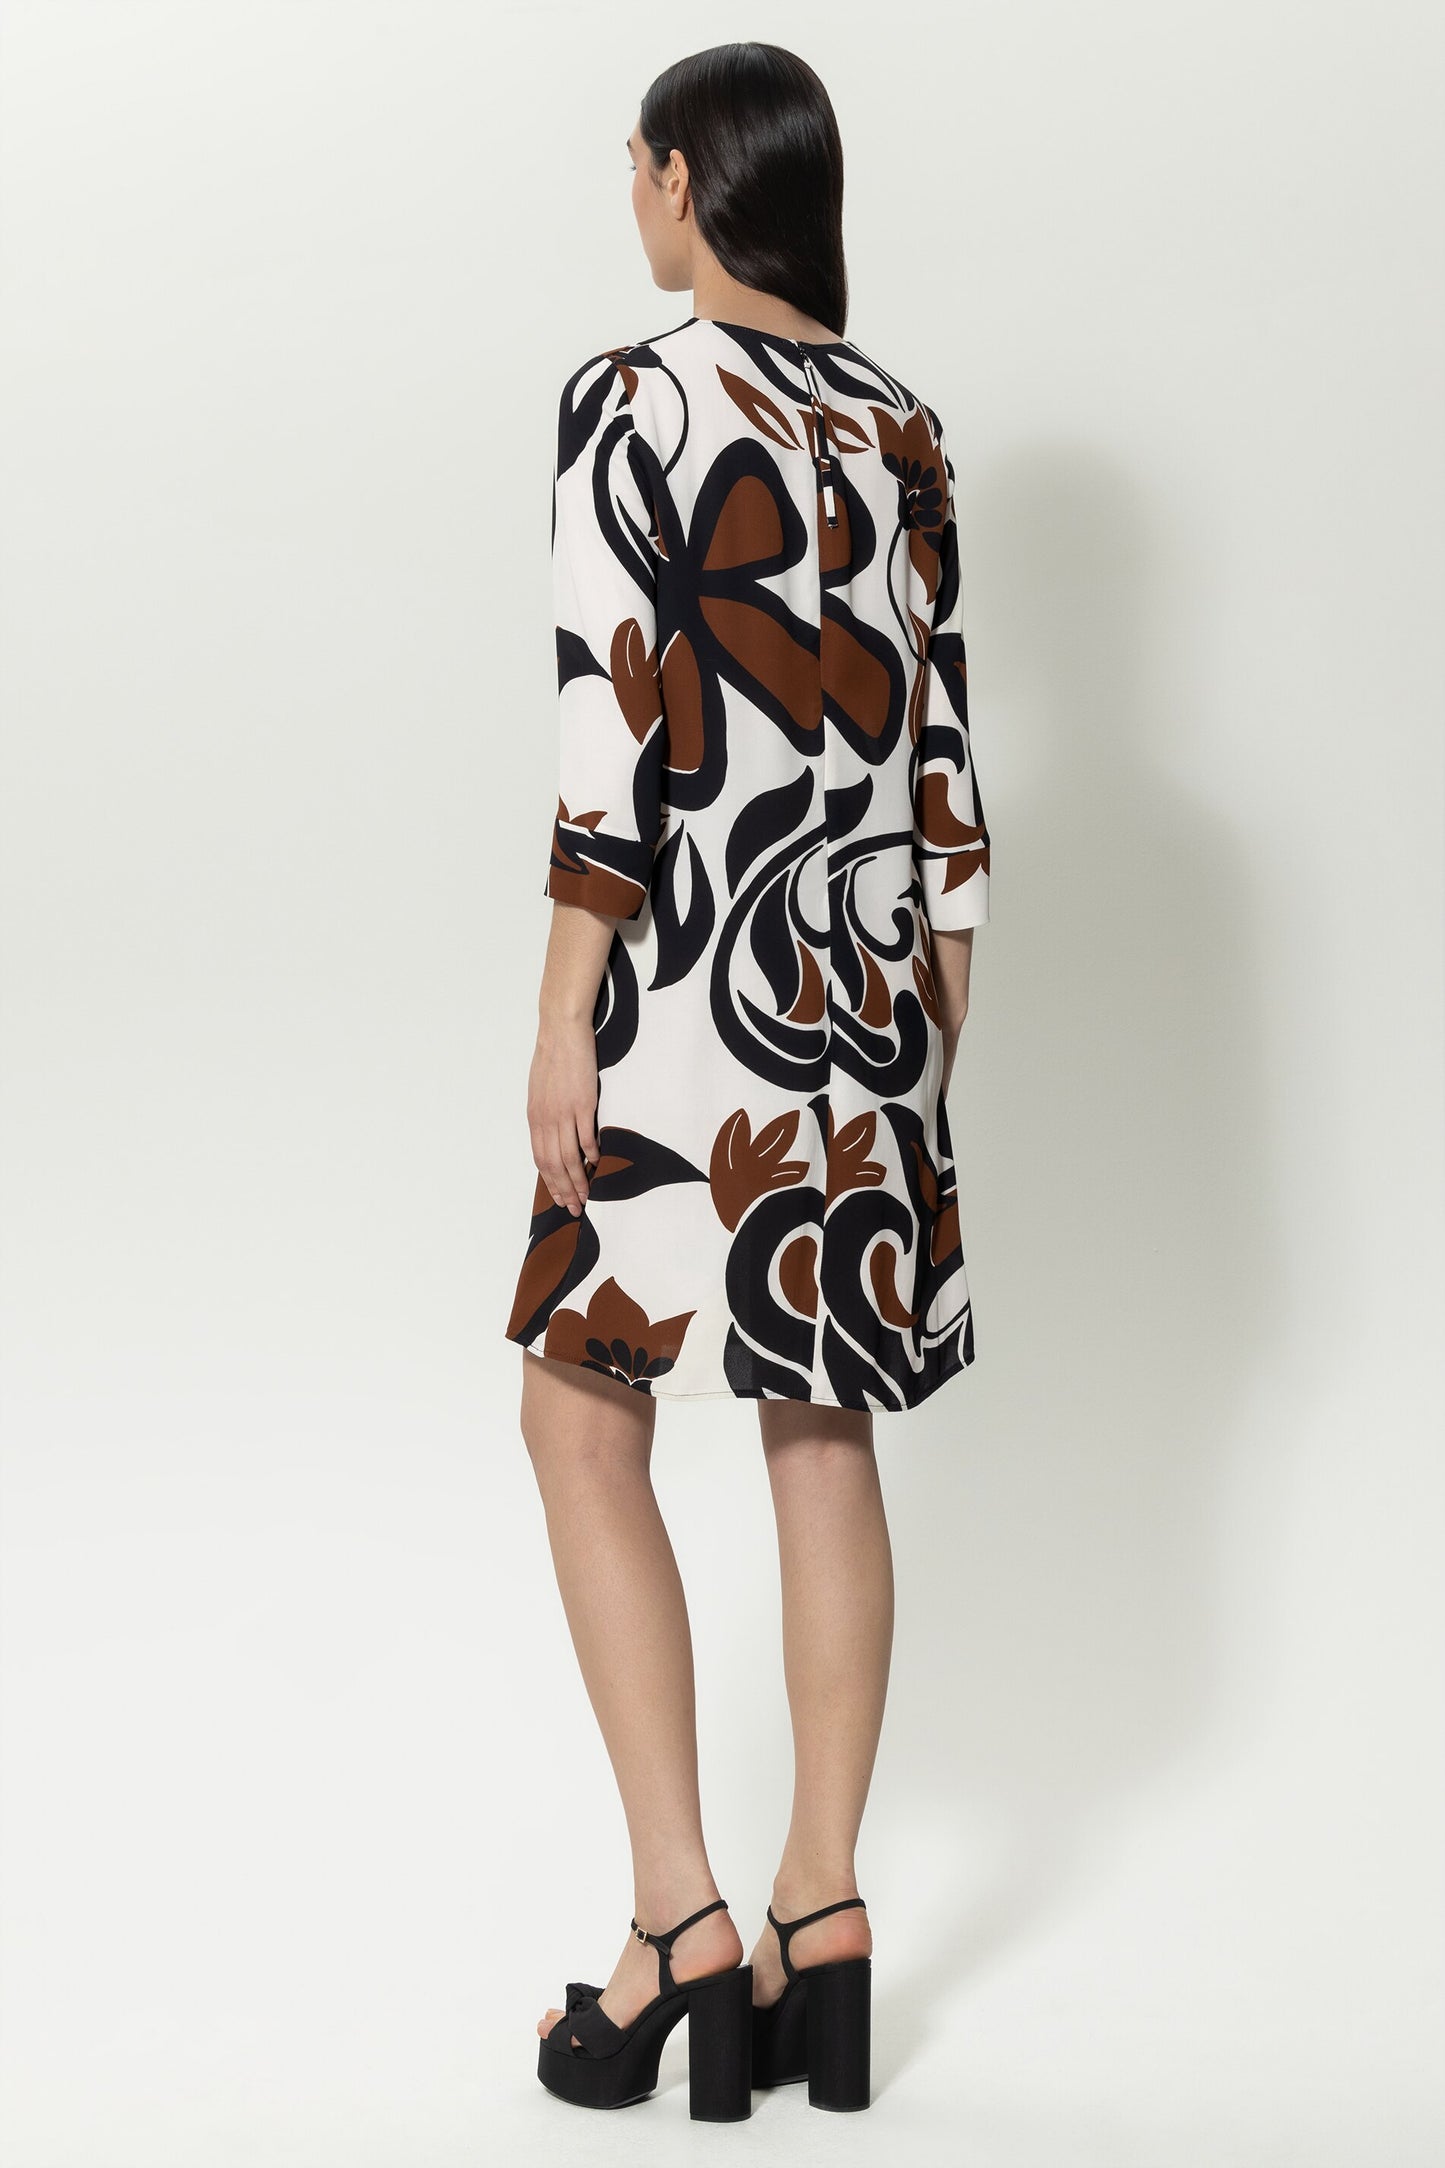 Straight-cut Dress with Graphic Floral Print